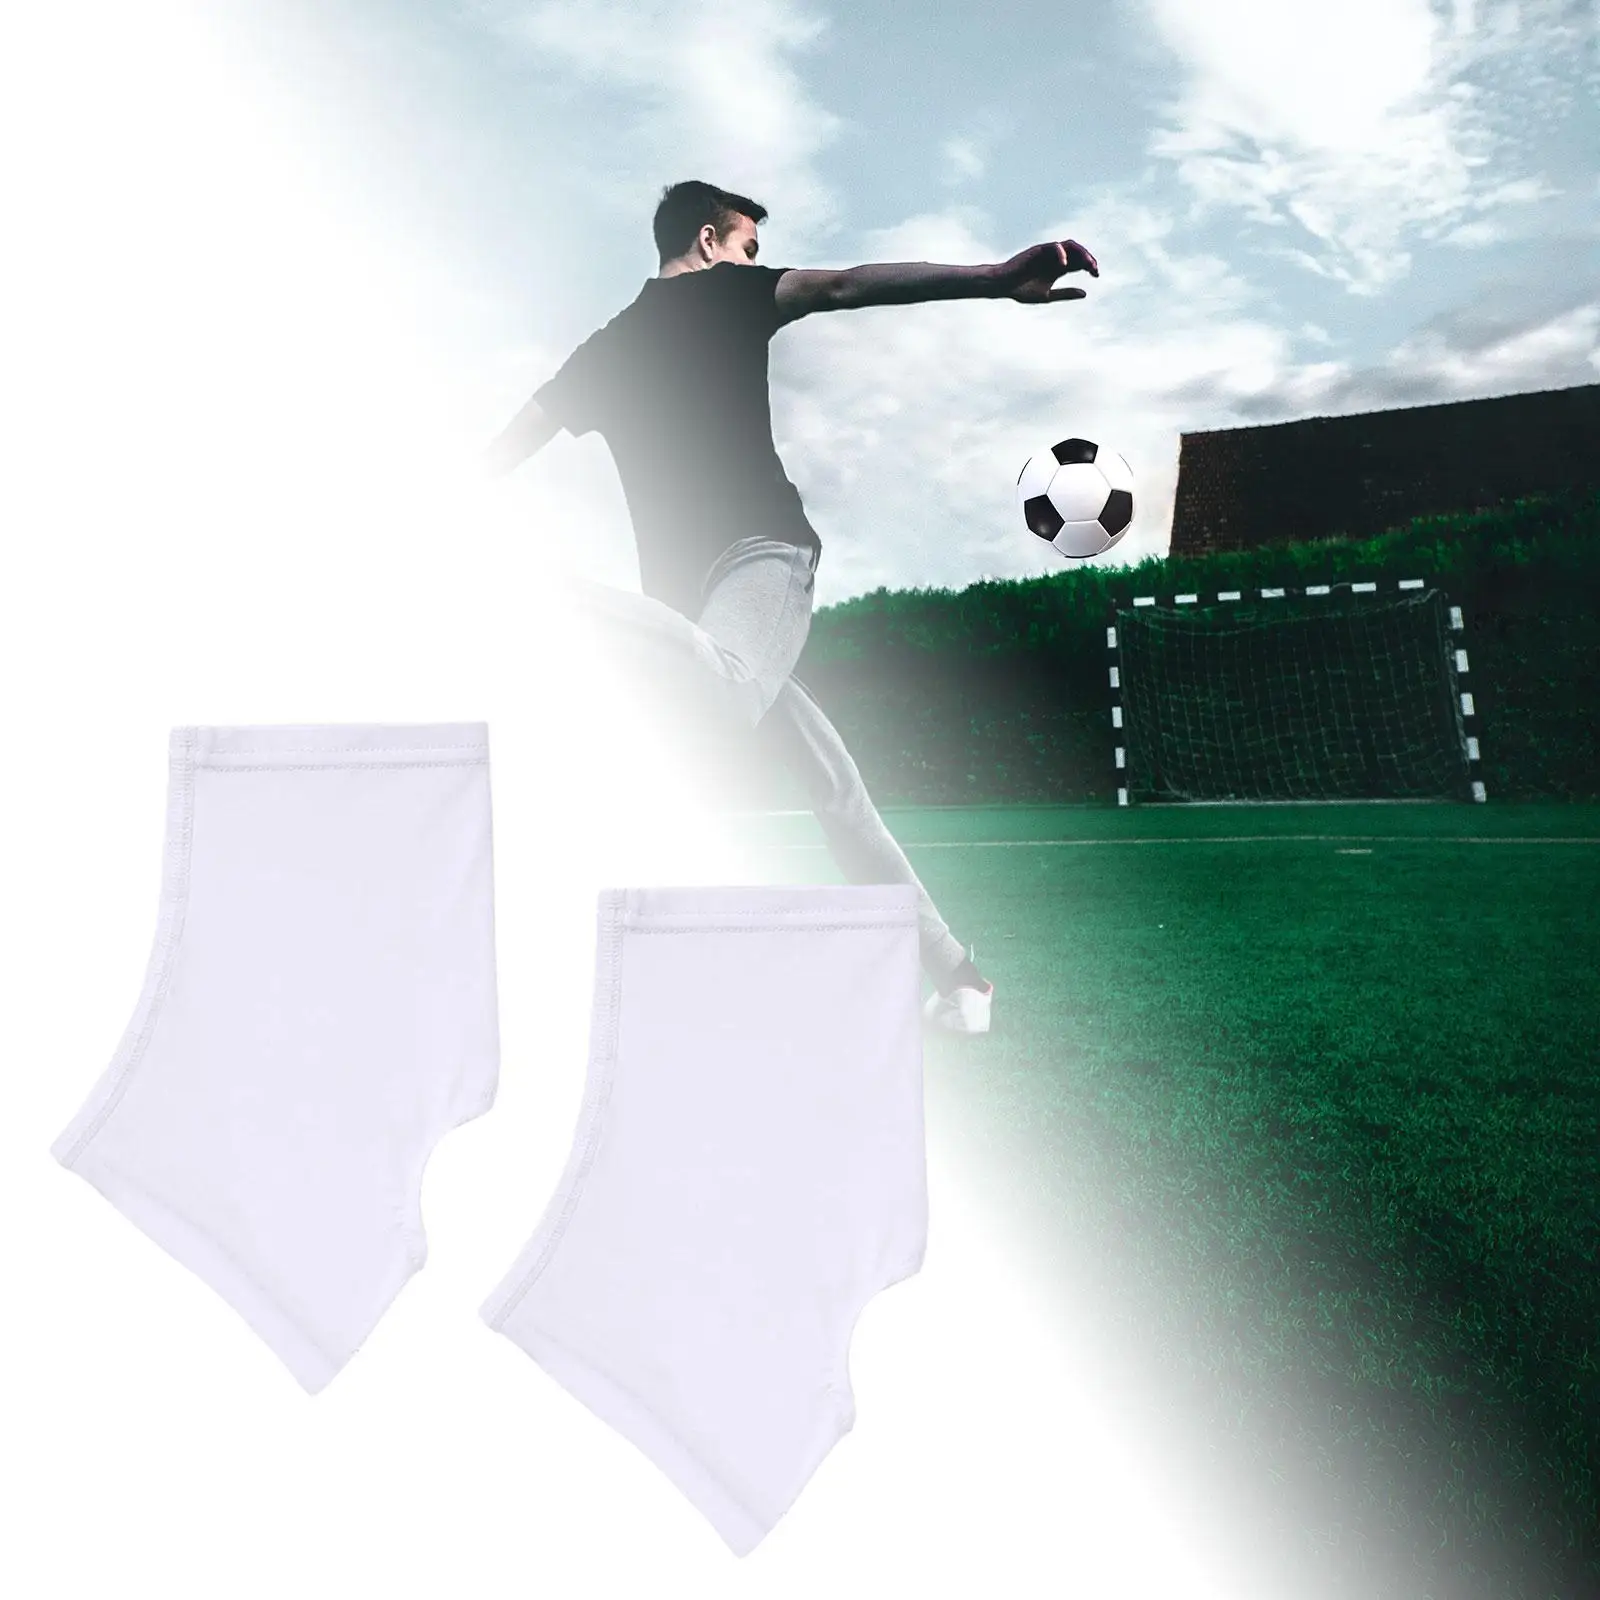 2Pcs Spats Lacrosse Baseball Wraps for Field Hockey Turf 1 Pair Cleat Covers